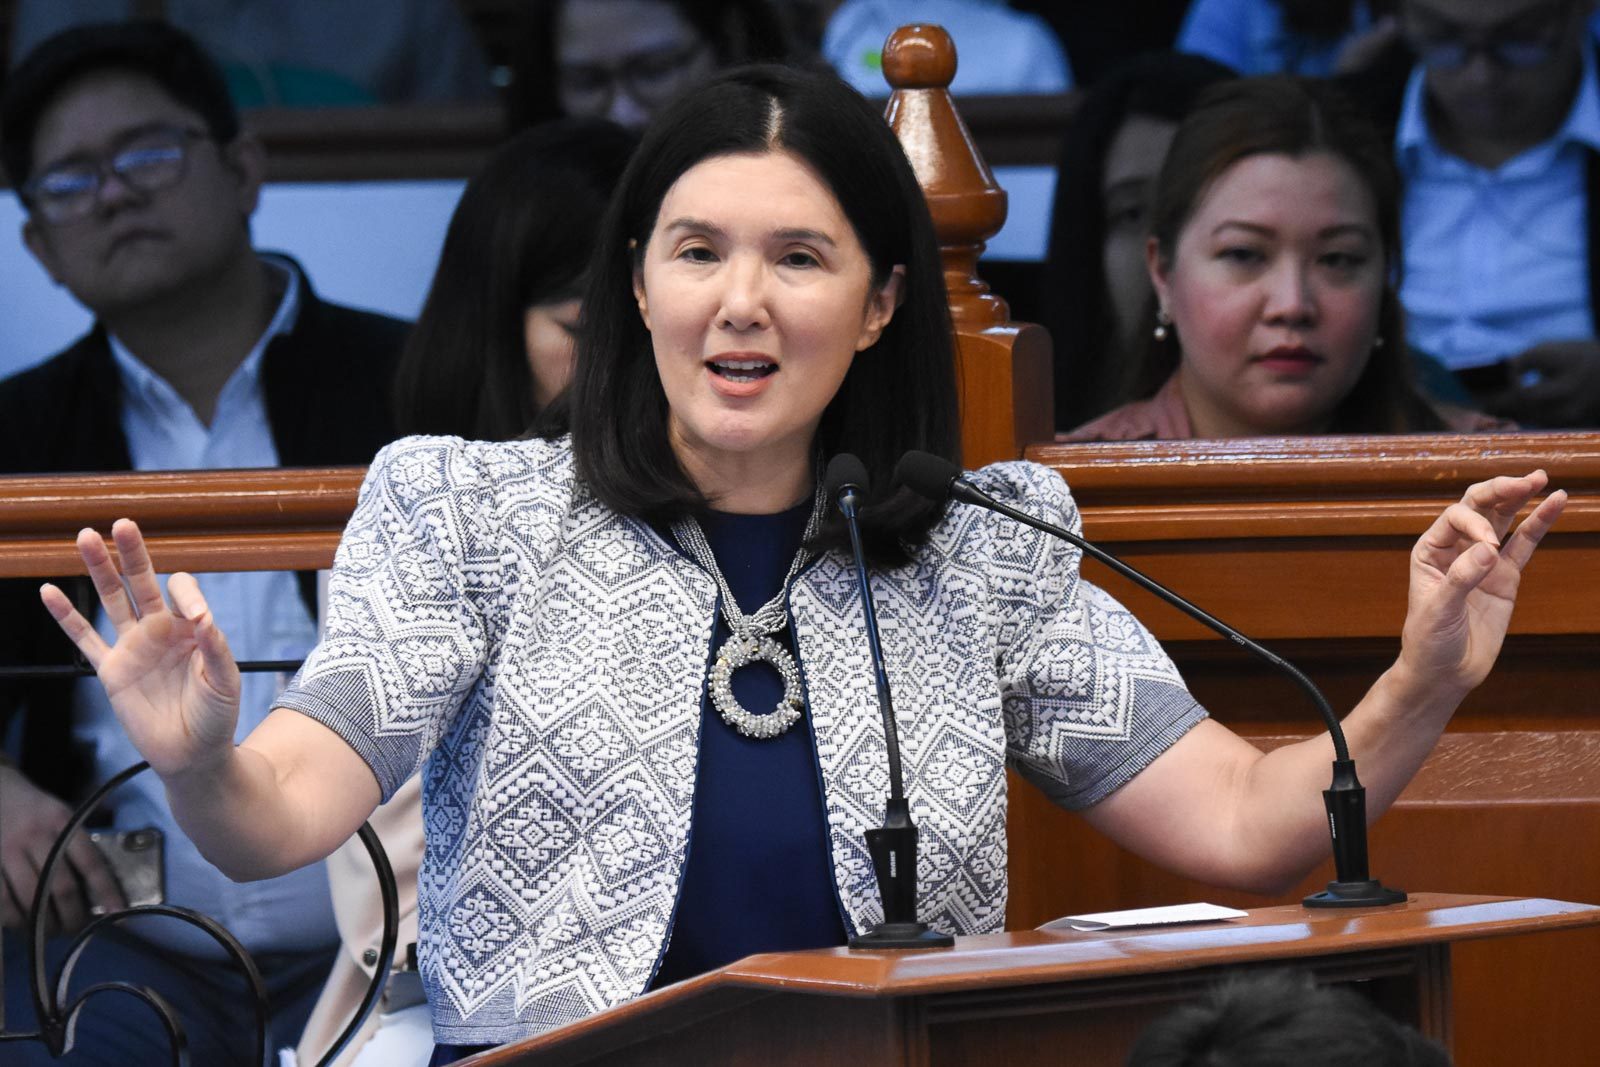 Territorial dispute: Pia Cayetano fumes over Marcos tackling Citira at committee hearing